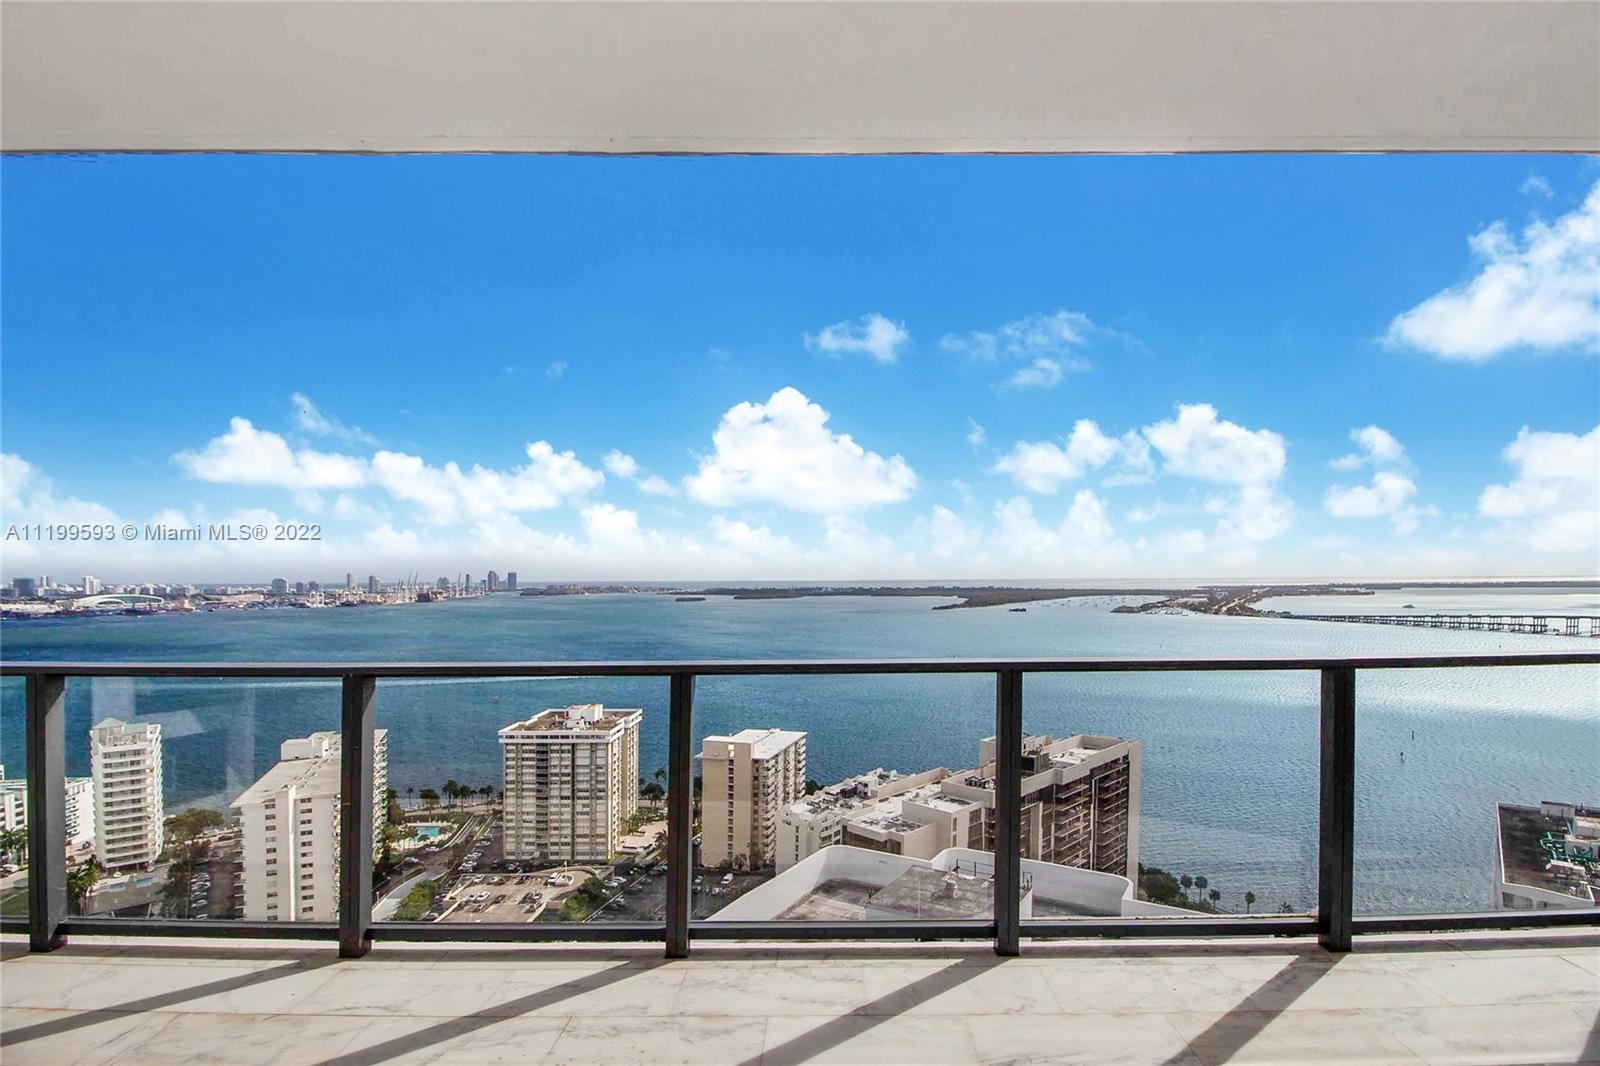 DIRECT WATERFRONT LINE 02 CORNER UNIT IN ECHO BRICKELL. 2 BEDROOM PLUS DEN (THAT CAN BE USED AS 3RD BEDROOM), 3 BATHROOM, SMART APARTMENT WITH UNOBSTRUCTED OCEAN VIEWS AND EXPANSIVE TERRACE INCLUDING SUMMER KITCHEN. UNFURNISHED. UNIT FACES SOUTHEAST WITH BREATHTAKING VIEWS OF THE OCEAN AND ISLAND OF KEY BISCAYNE. UNIT HAS FLOOR TO CEILING IMPACT WINDOWS, AUTOMATIC SHADES, ESPRESSO MACHINE, BUILT IN SMART SOUND SYSTEM THROUGHOUT, FULL SIZE WASHER/DRYER, AND TOP OF THE LINE WOLF/SUBZERO APPLIANCES. YOUR HOME IN THE SKY. ECHO IS ONE OF THE MOST EXCLUSIVE AND PRESTIGIOUS *BOUTIQUE* BUILDINGS IN BRICKELL. AMENITIES INCLUDE
INFINITY POOL AND DECK SERVING FOOD AND DRINKS, FULLY EQUIPPED GYM, 24/7 CONCIERGE, VALET, SECURITY, LOBBY, PET WALKER, AND NEARBY BEST RESTAURANTS.